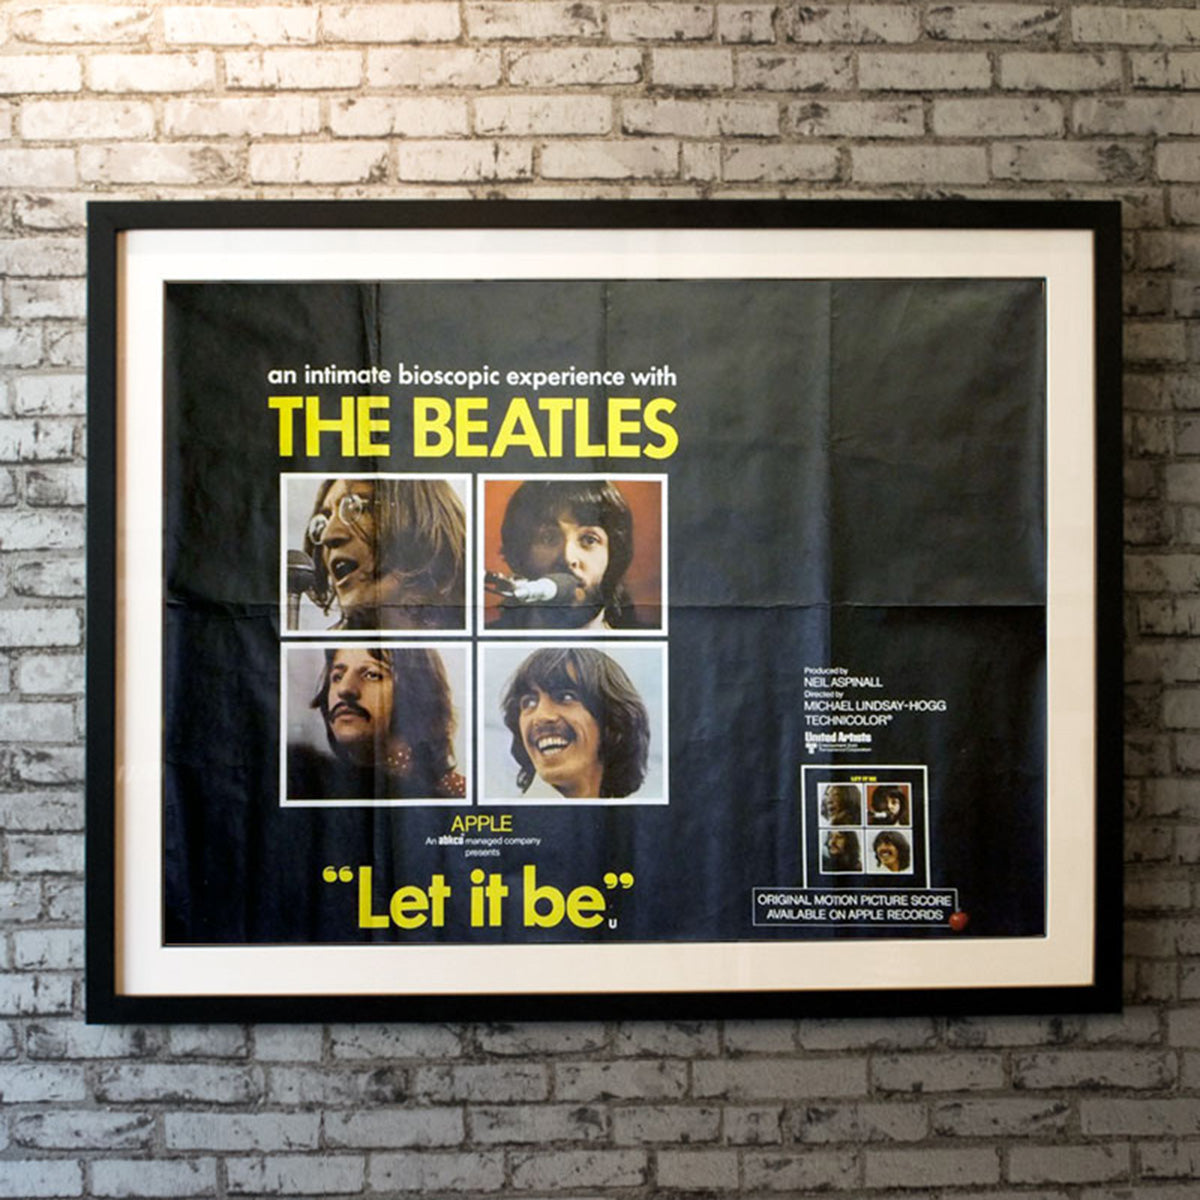 Original Movie Poster of Let It Be (1970)